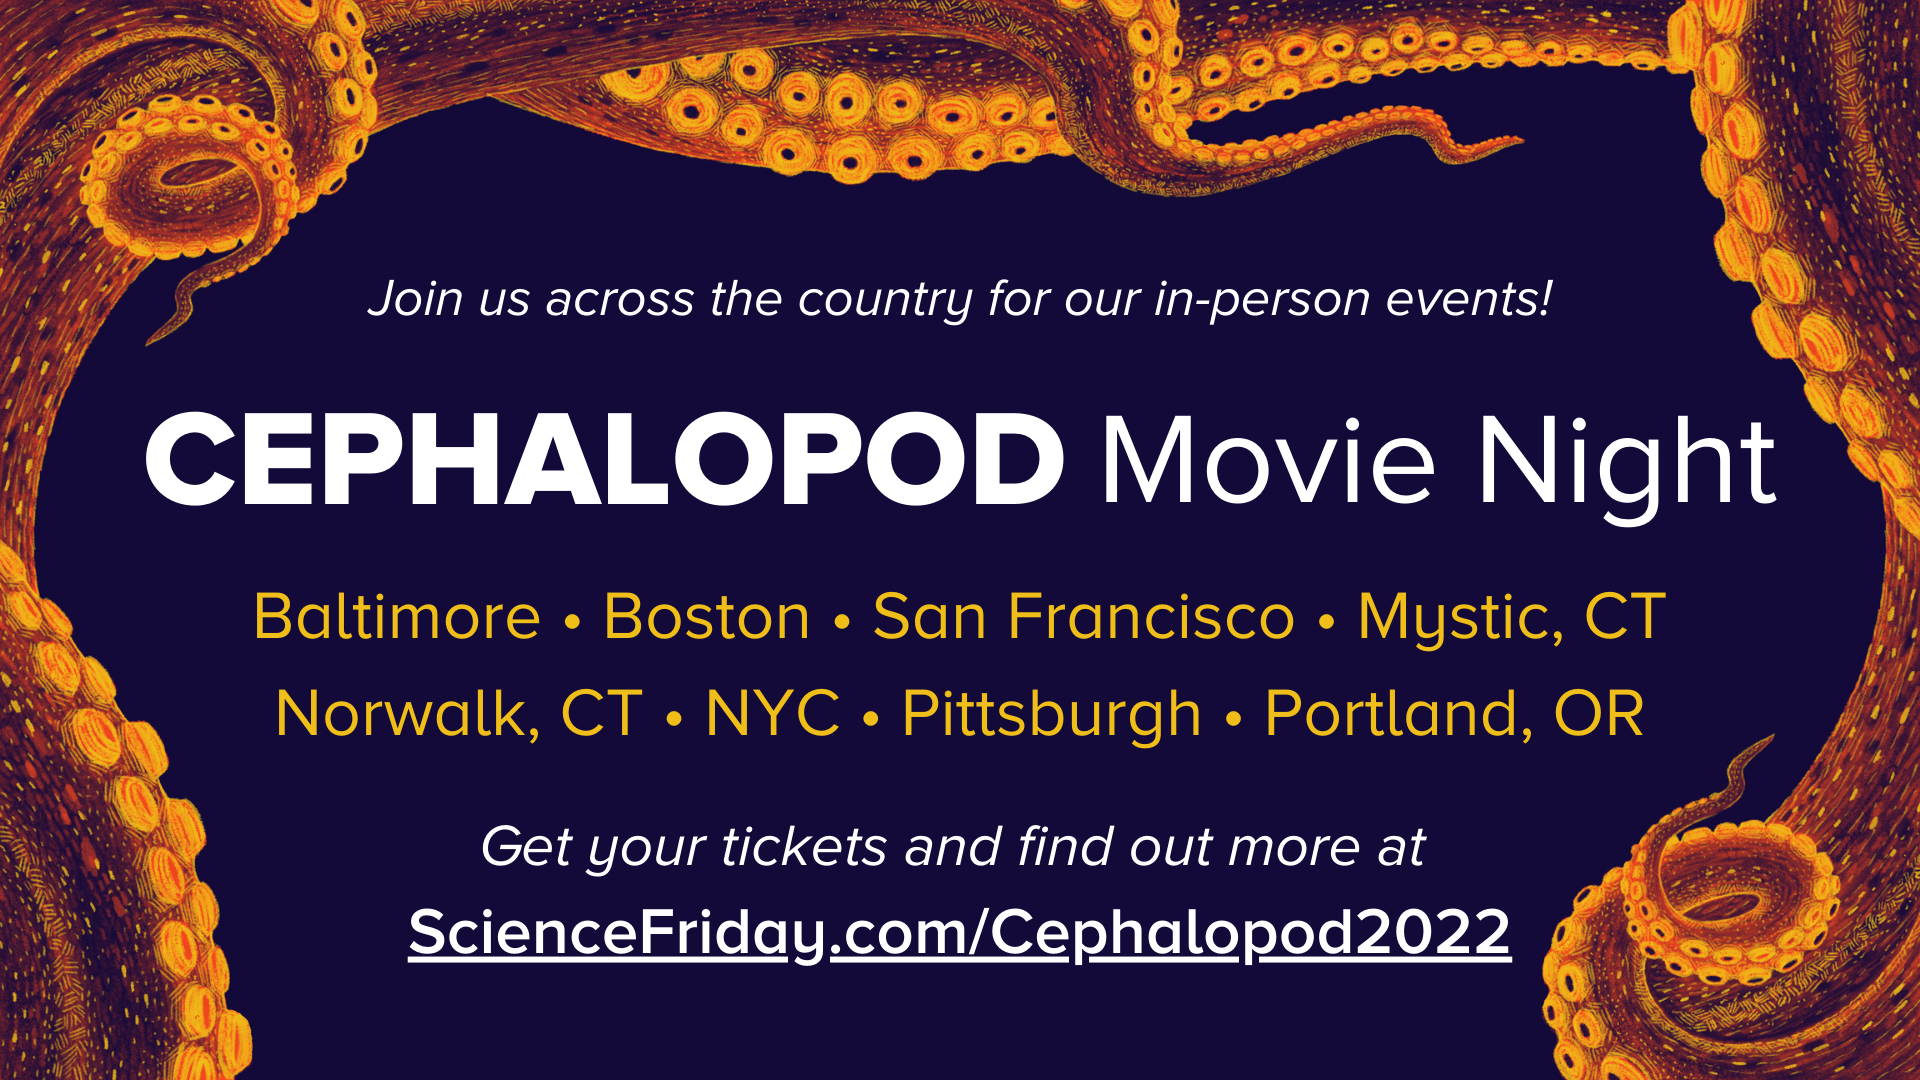 a border of illustrated, orange-yellow octopus tentacles curling around the left, top, and bottom of the image, with event promotional info: Join us across the country for our in-person events! Cephalopod Movie Night. Baltimore, Boston, San Francisco, Mystic, CT, Norwalk, CT, NYC, Pittsburgh, Portland, OR. Get your ticket and find out more at: ScienceFriday.com/Cephalopod2022